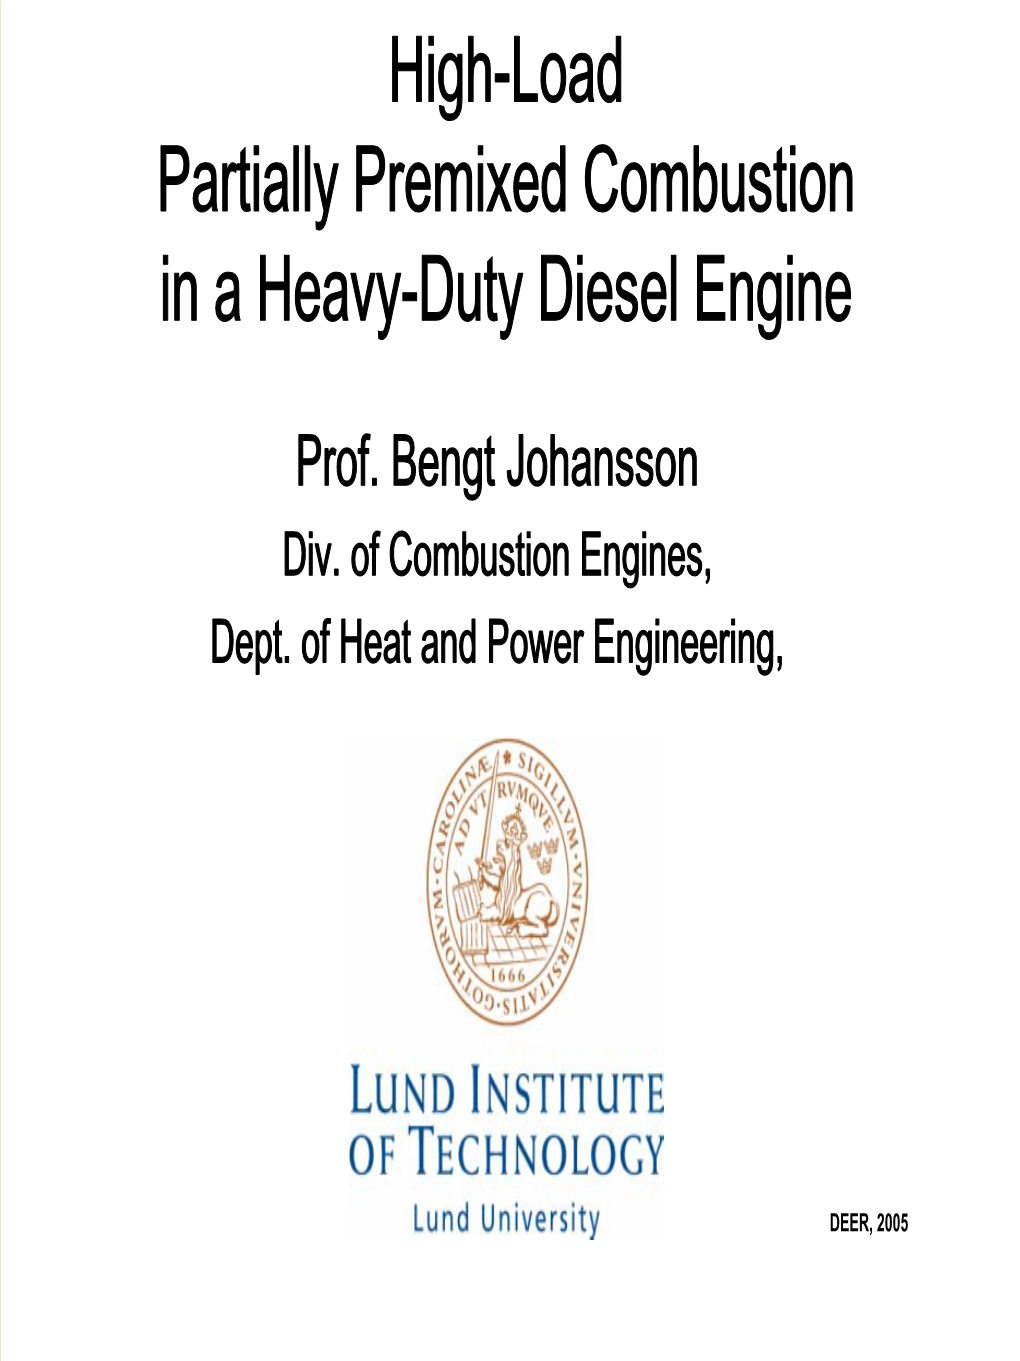 High-Load Partially Premixed Combustion in a Heavy-Duty Diesel Engine